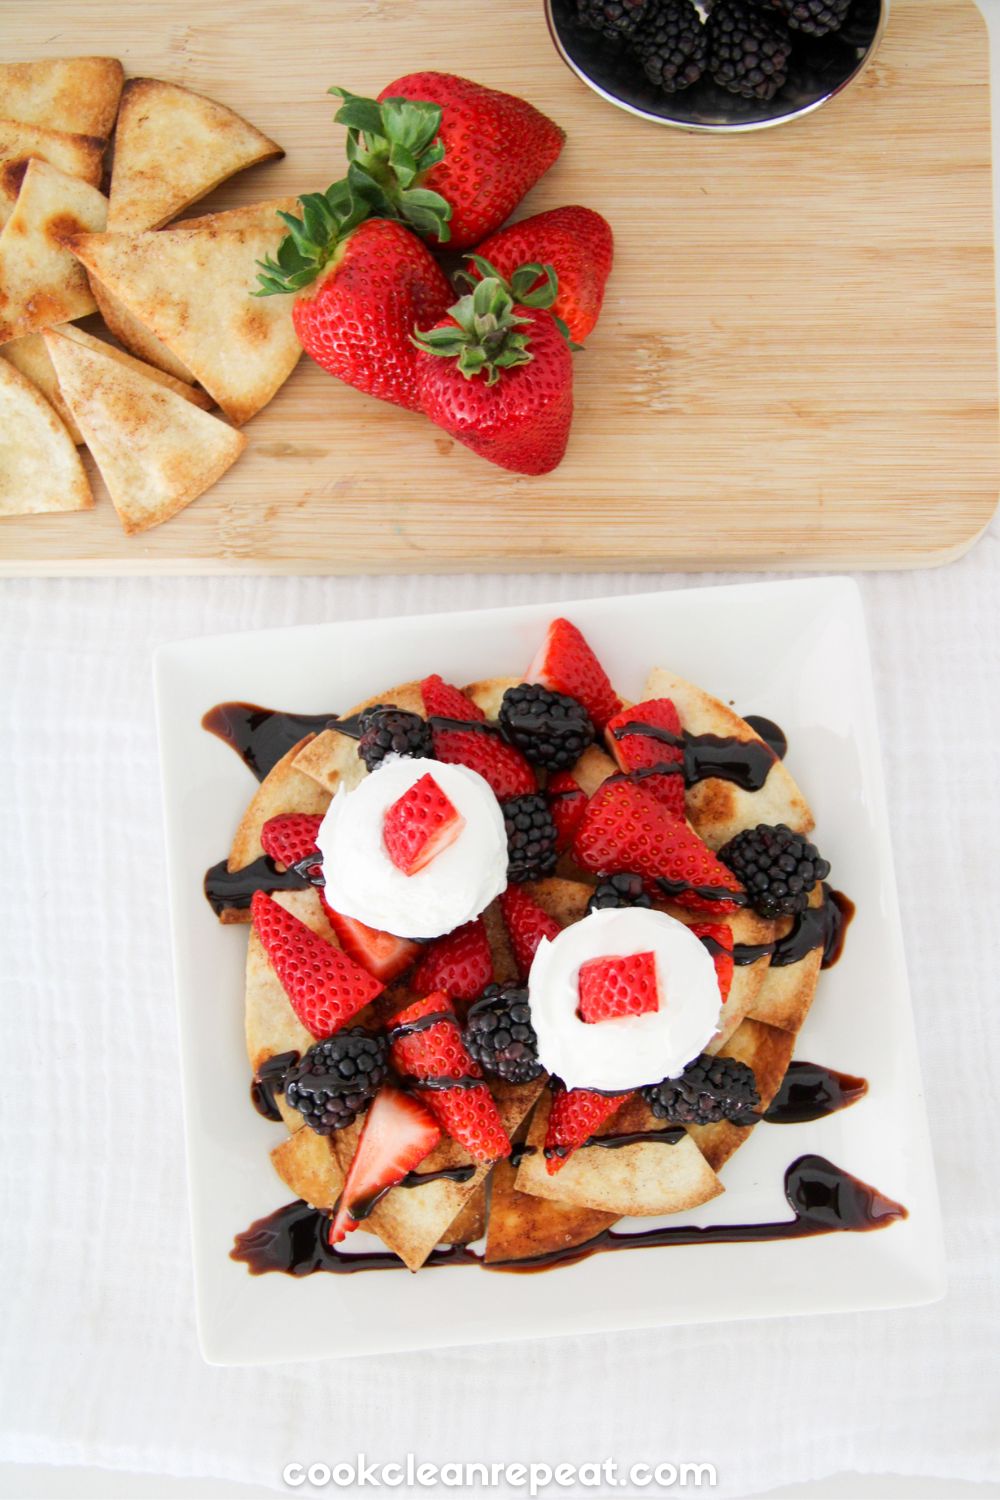 dessert nachos served on a white plate topped with whipped cream and strawberry pieces. There is a cutting board with other chips and strawberries above the plate.